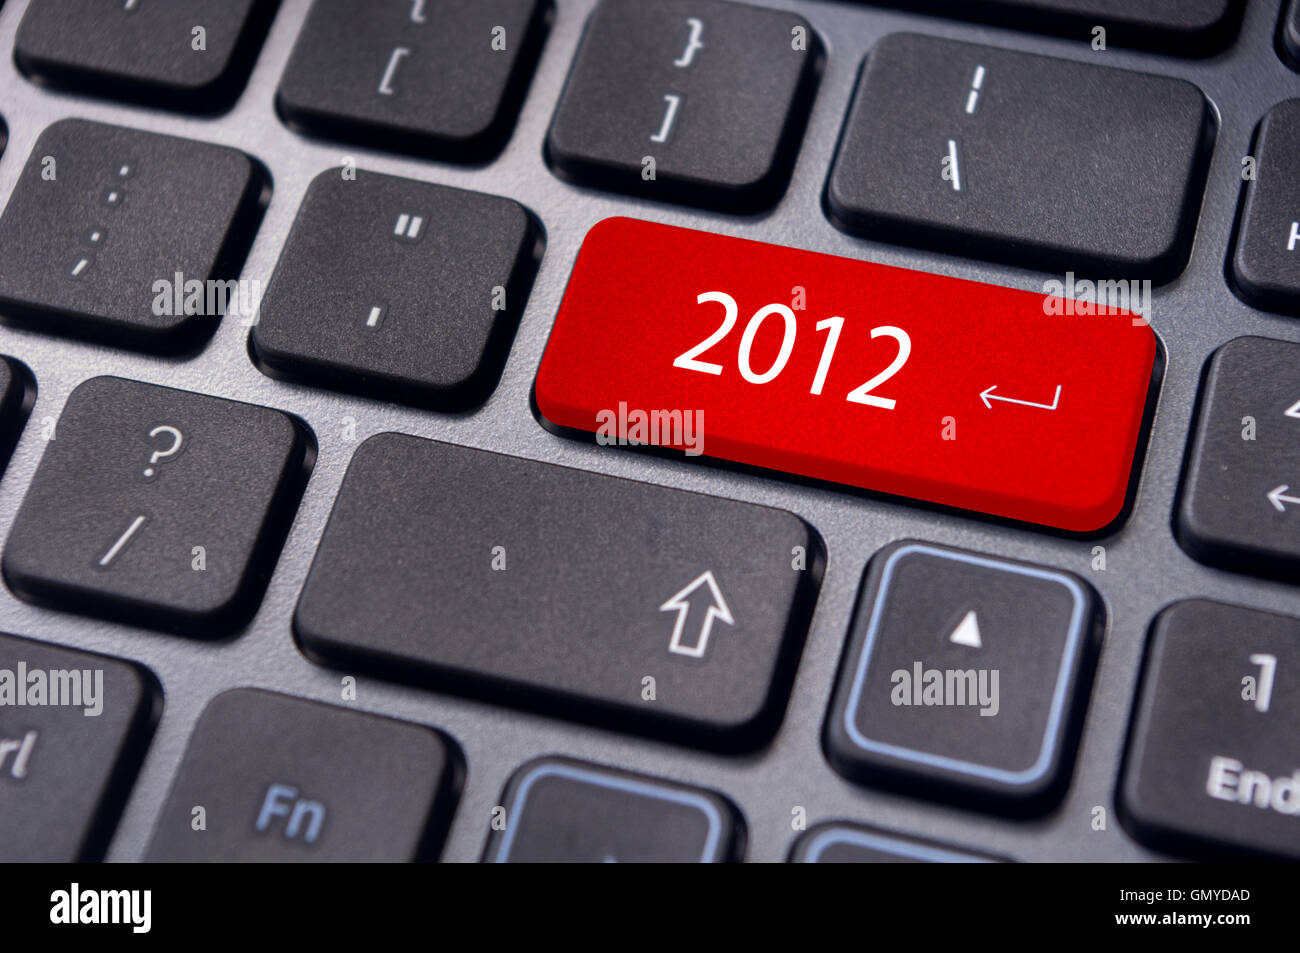 new year 2012, keyboard concepts Stock Photo